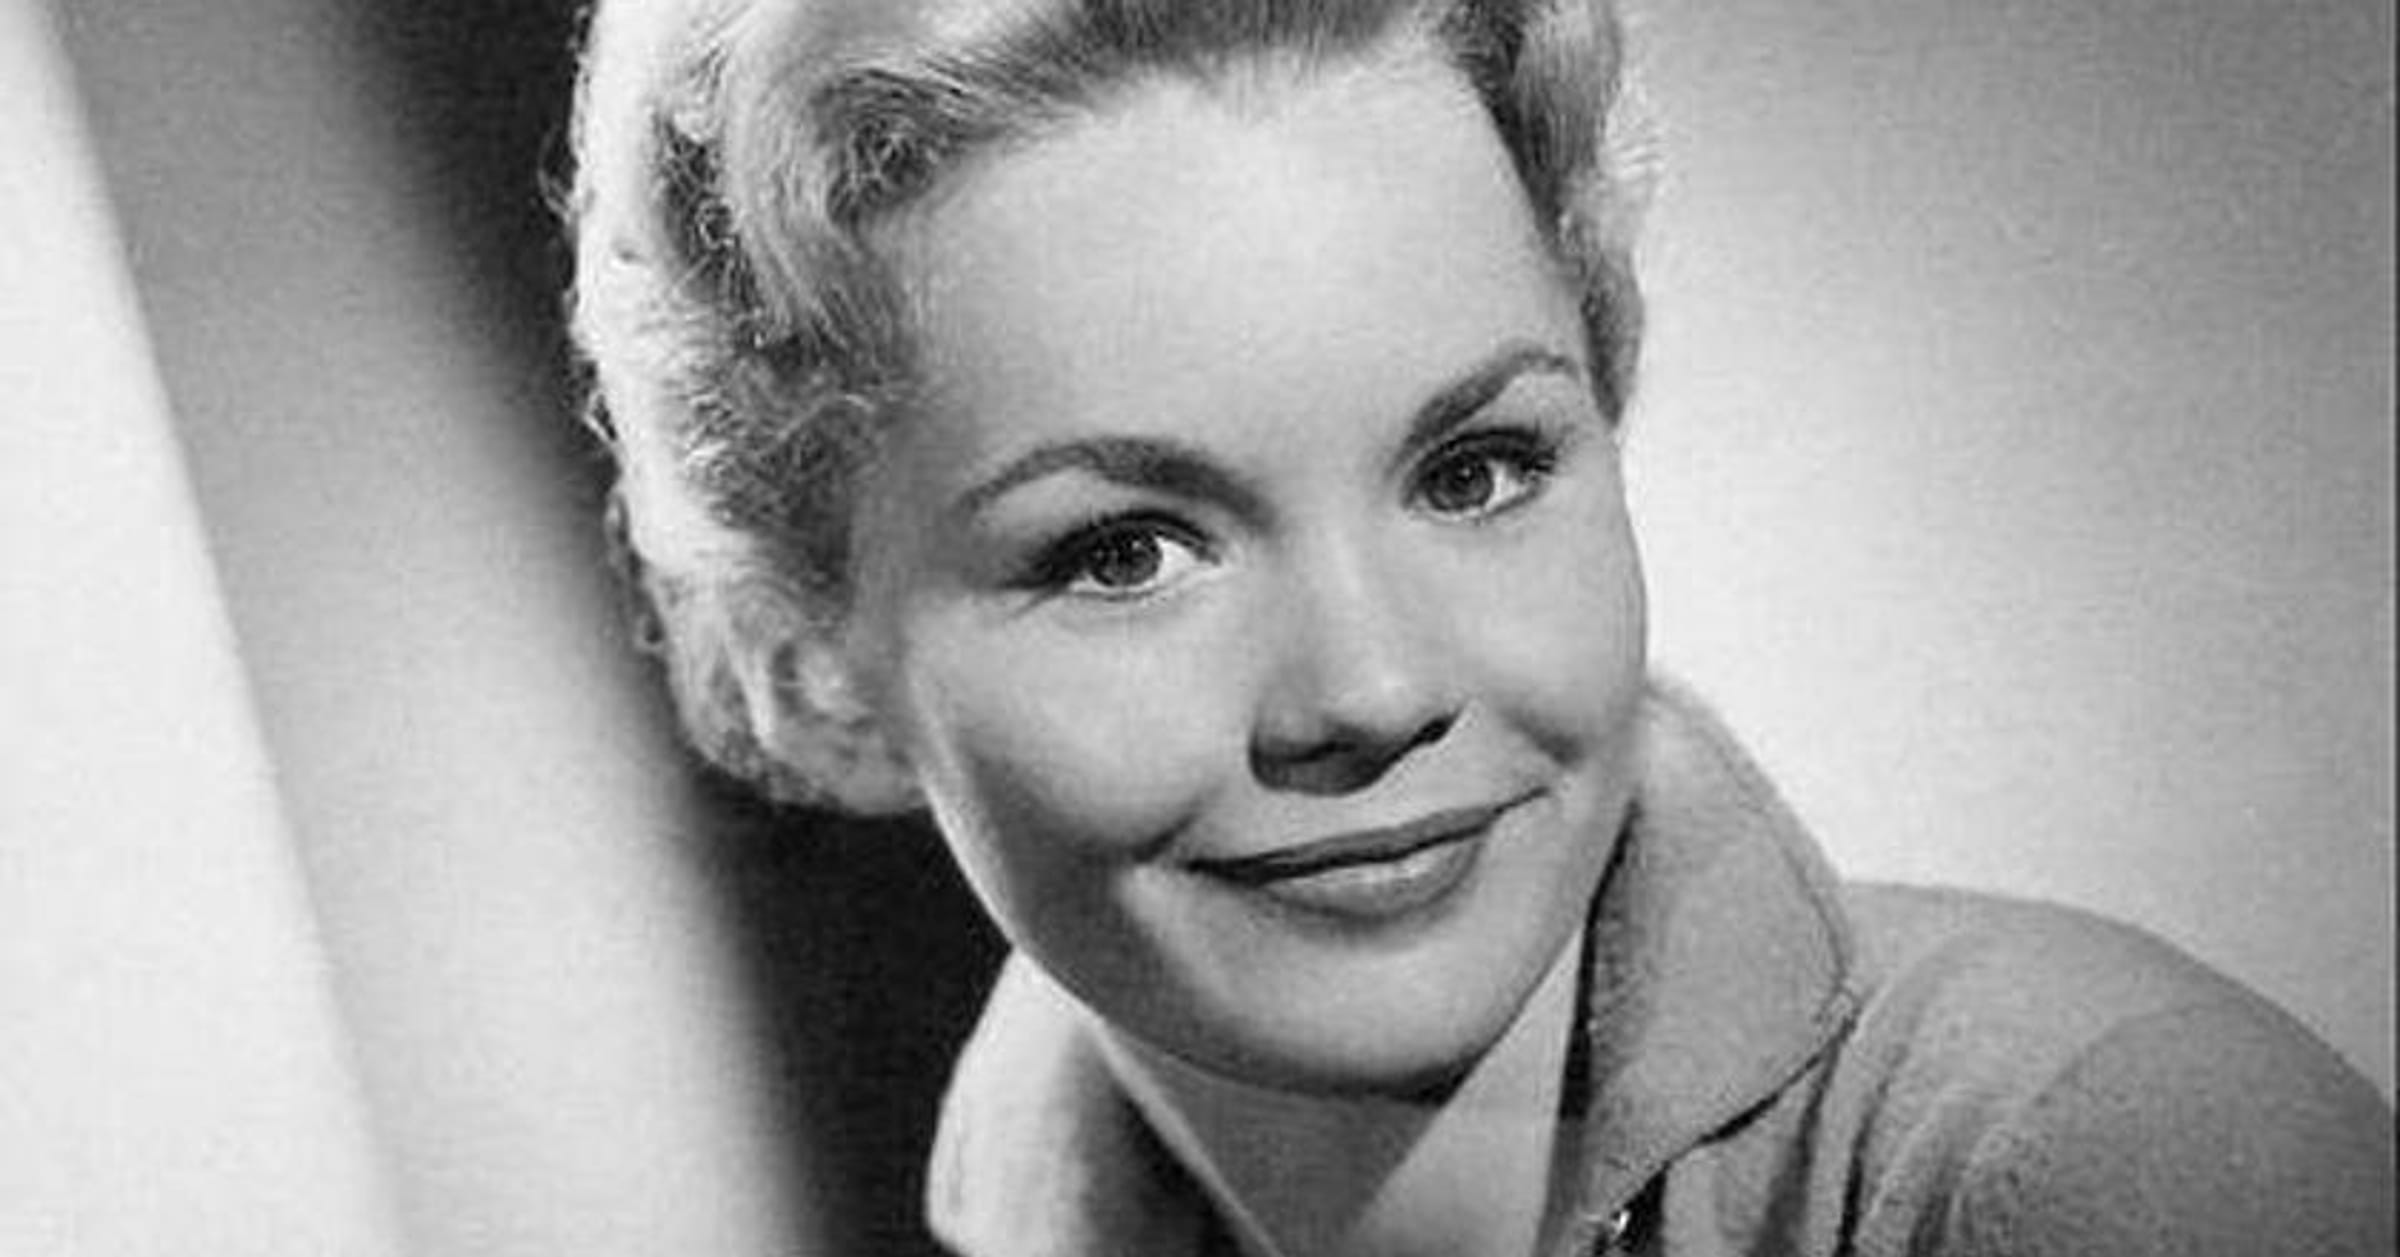 Tuesday Weld - Rotten Tomatoes